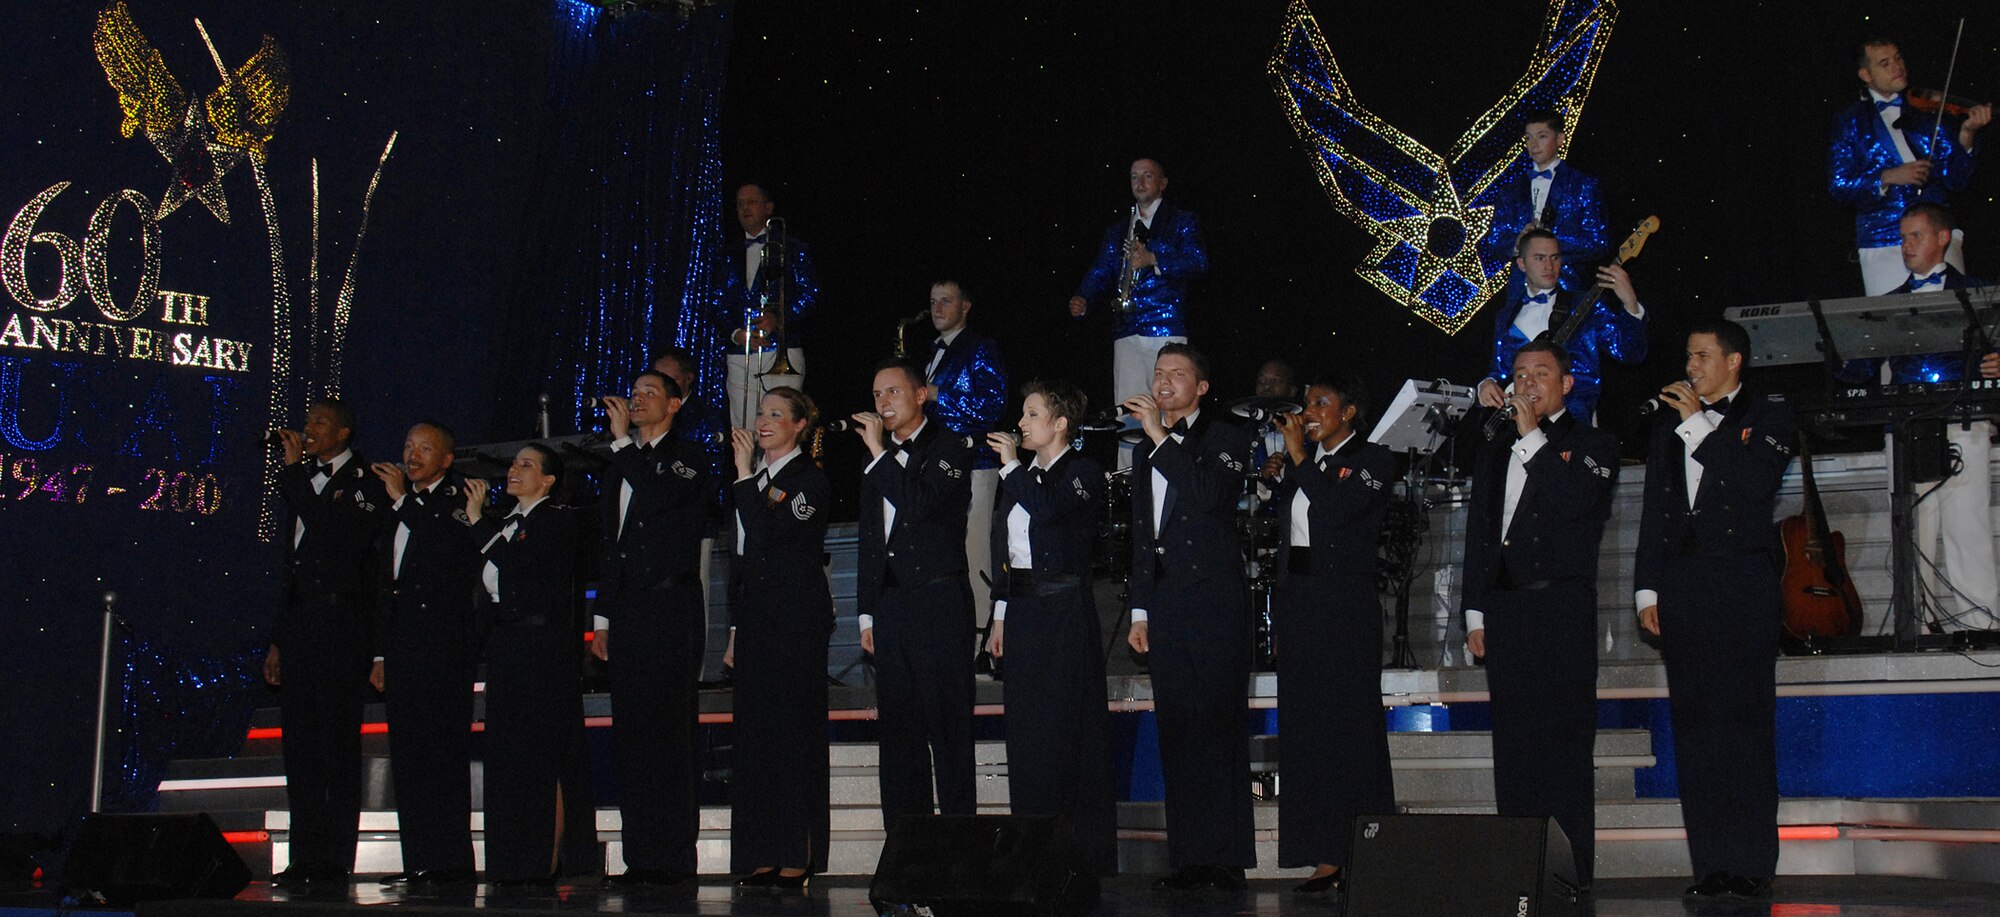 Members of Tops In Blue close out the night's performance with the singing of the Air Force song Jan.3. The performance was held from 7 to 9 p.m in Hangar 2 here. (U.S. Air Force photo/Senior Airman Sonya Padilla)